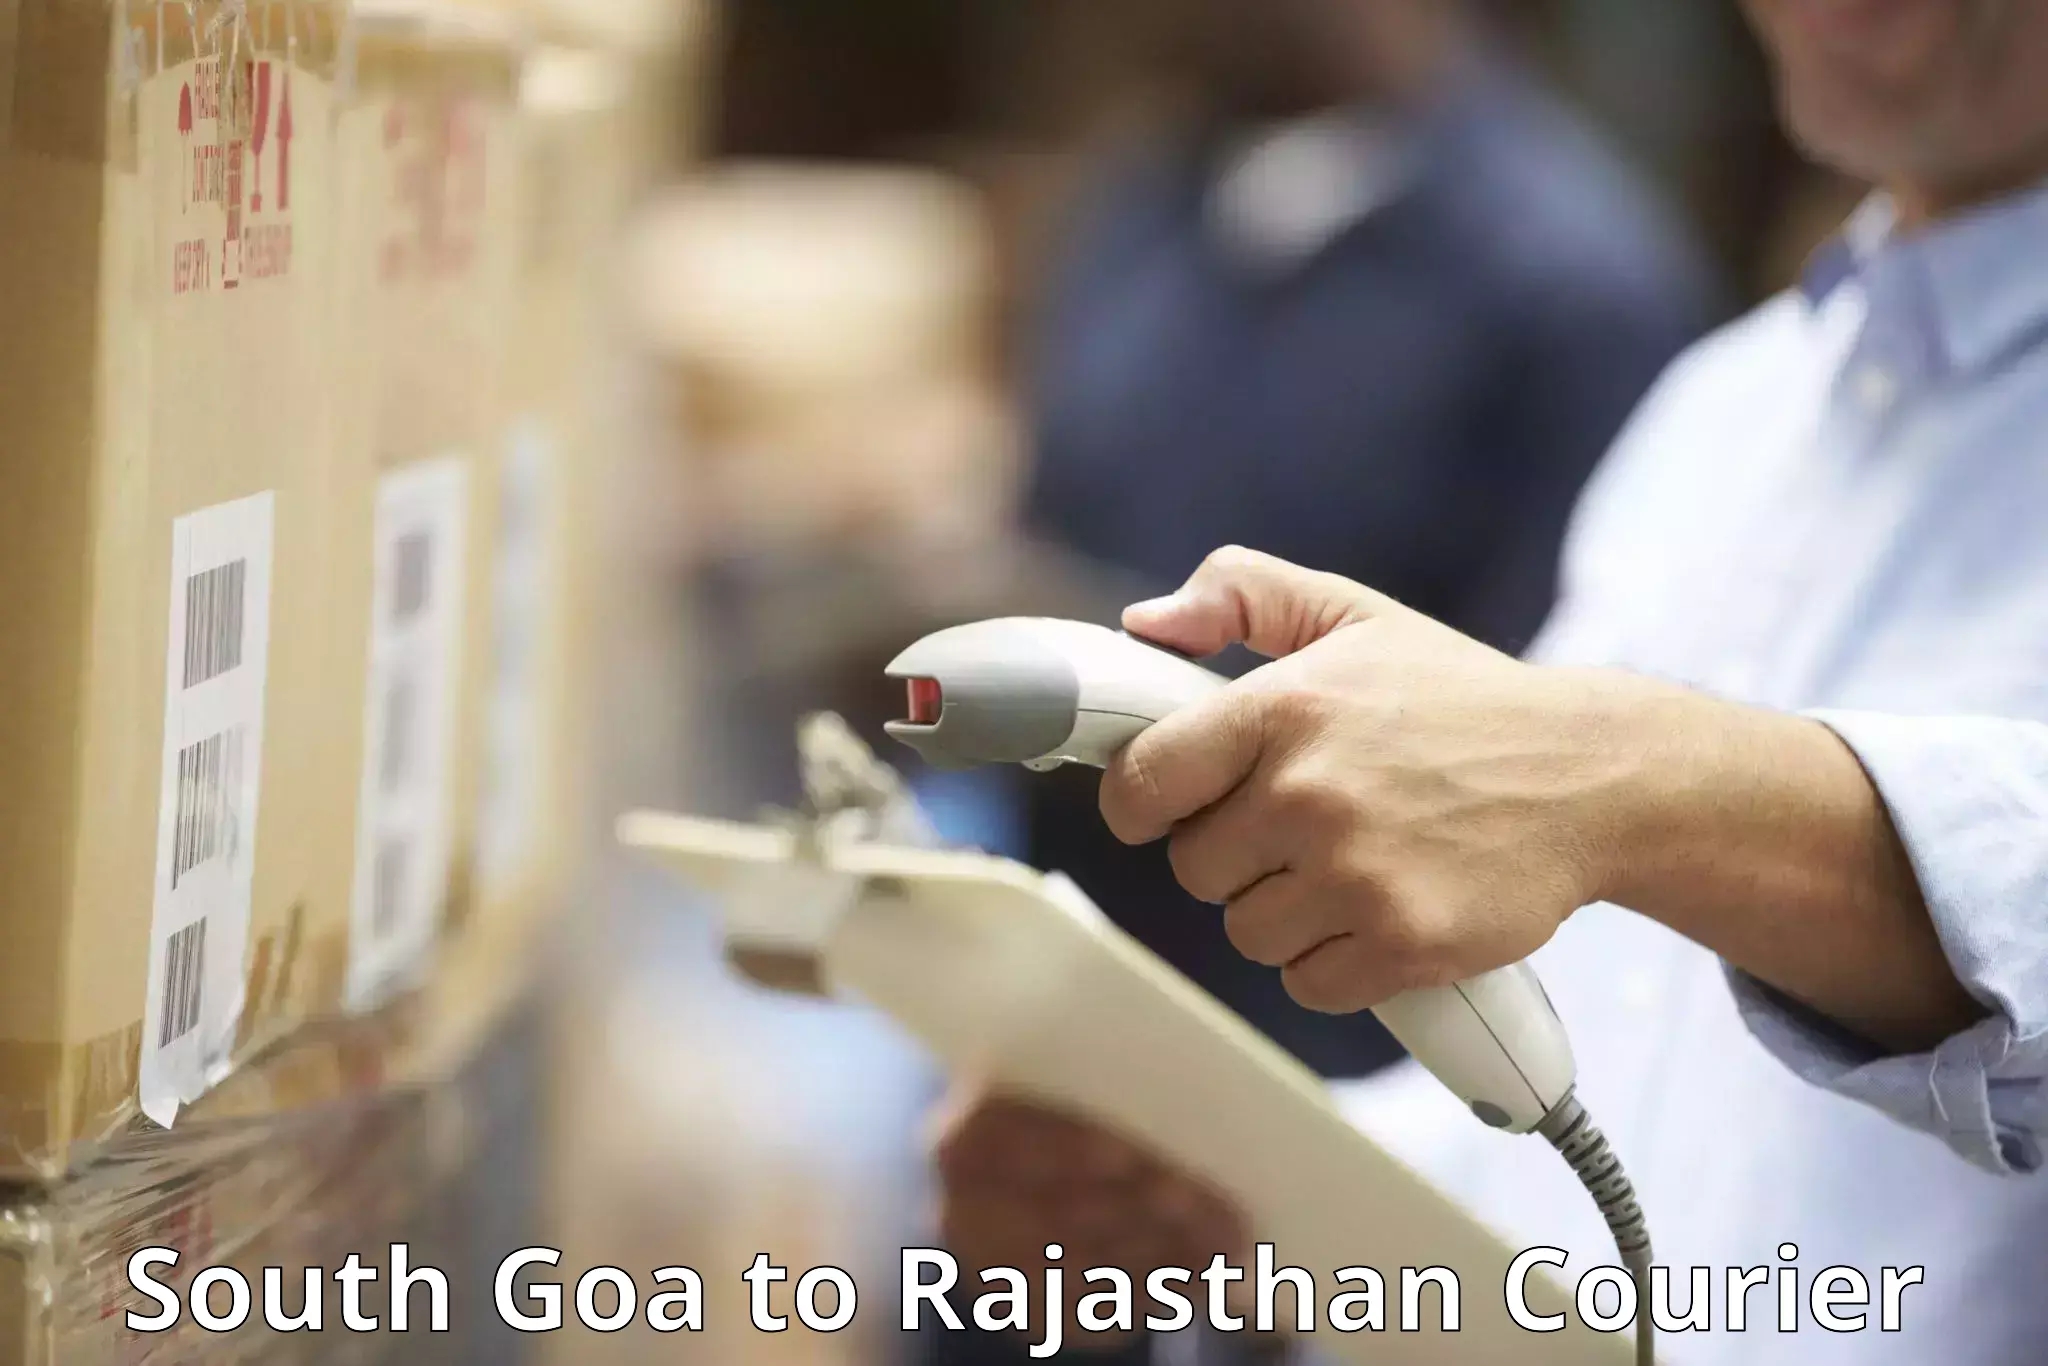 Emergency baggage service South Goa to Rajasthan